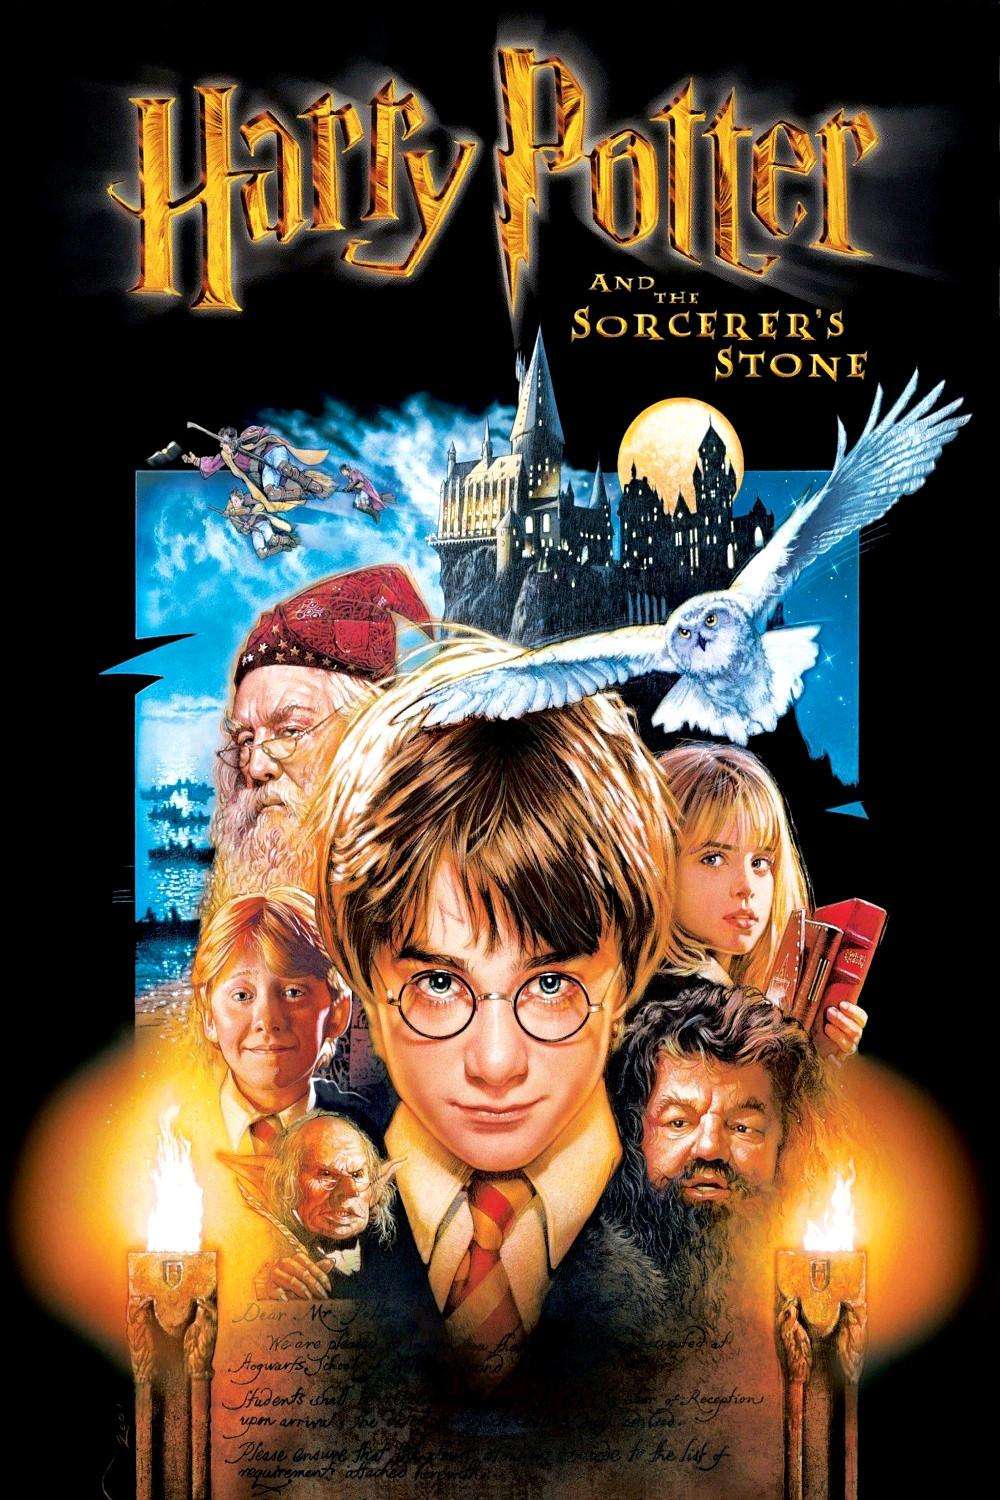 Tickets for Harry Potter and the Sorcerer